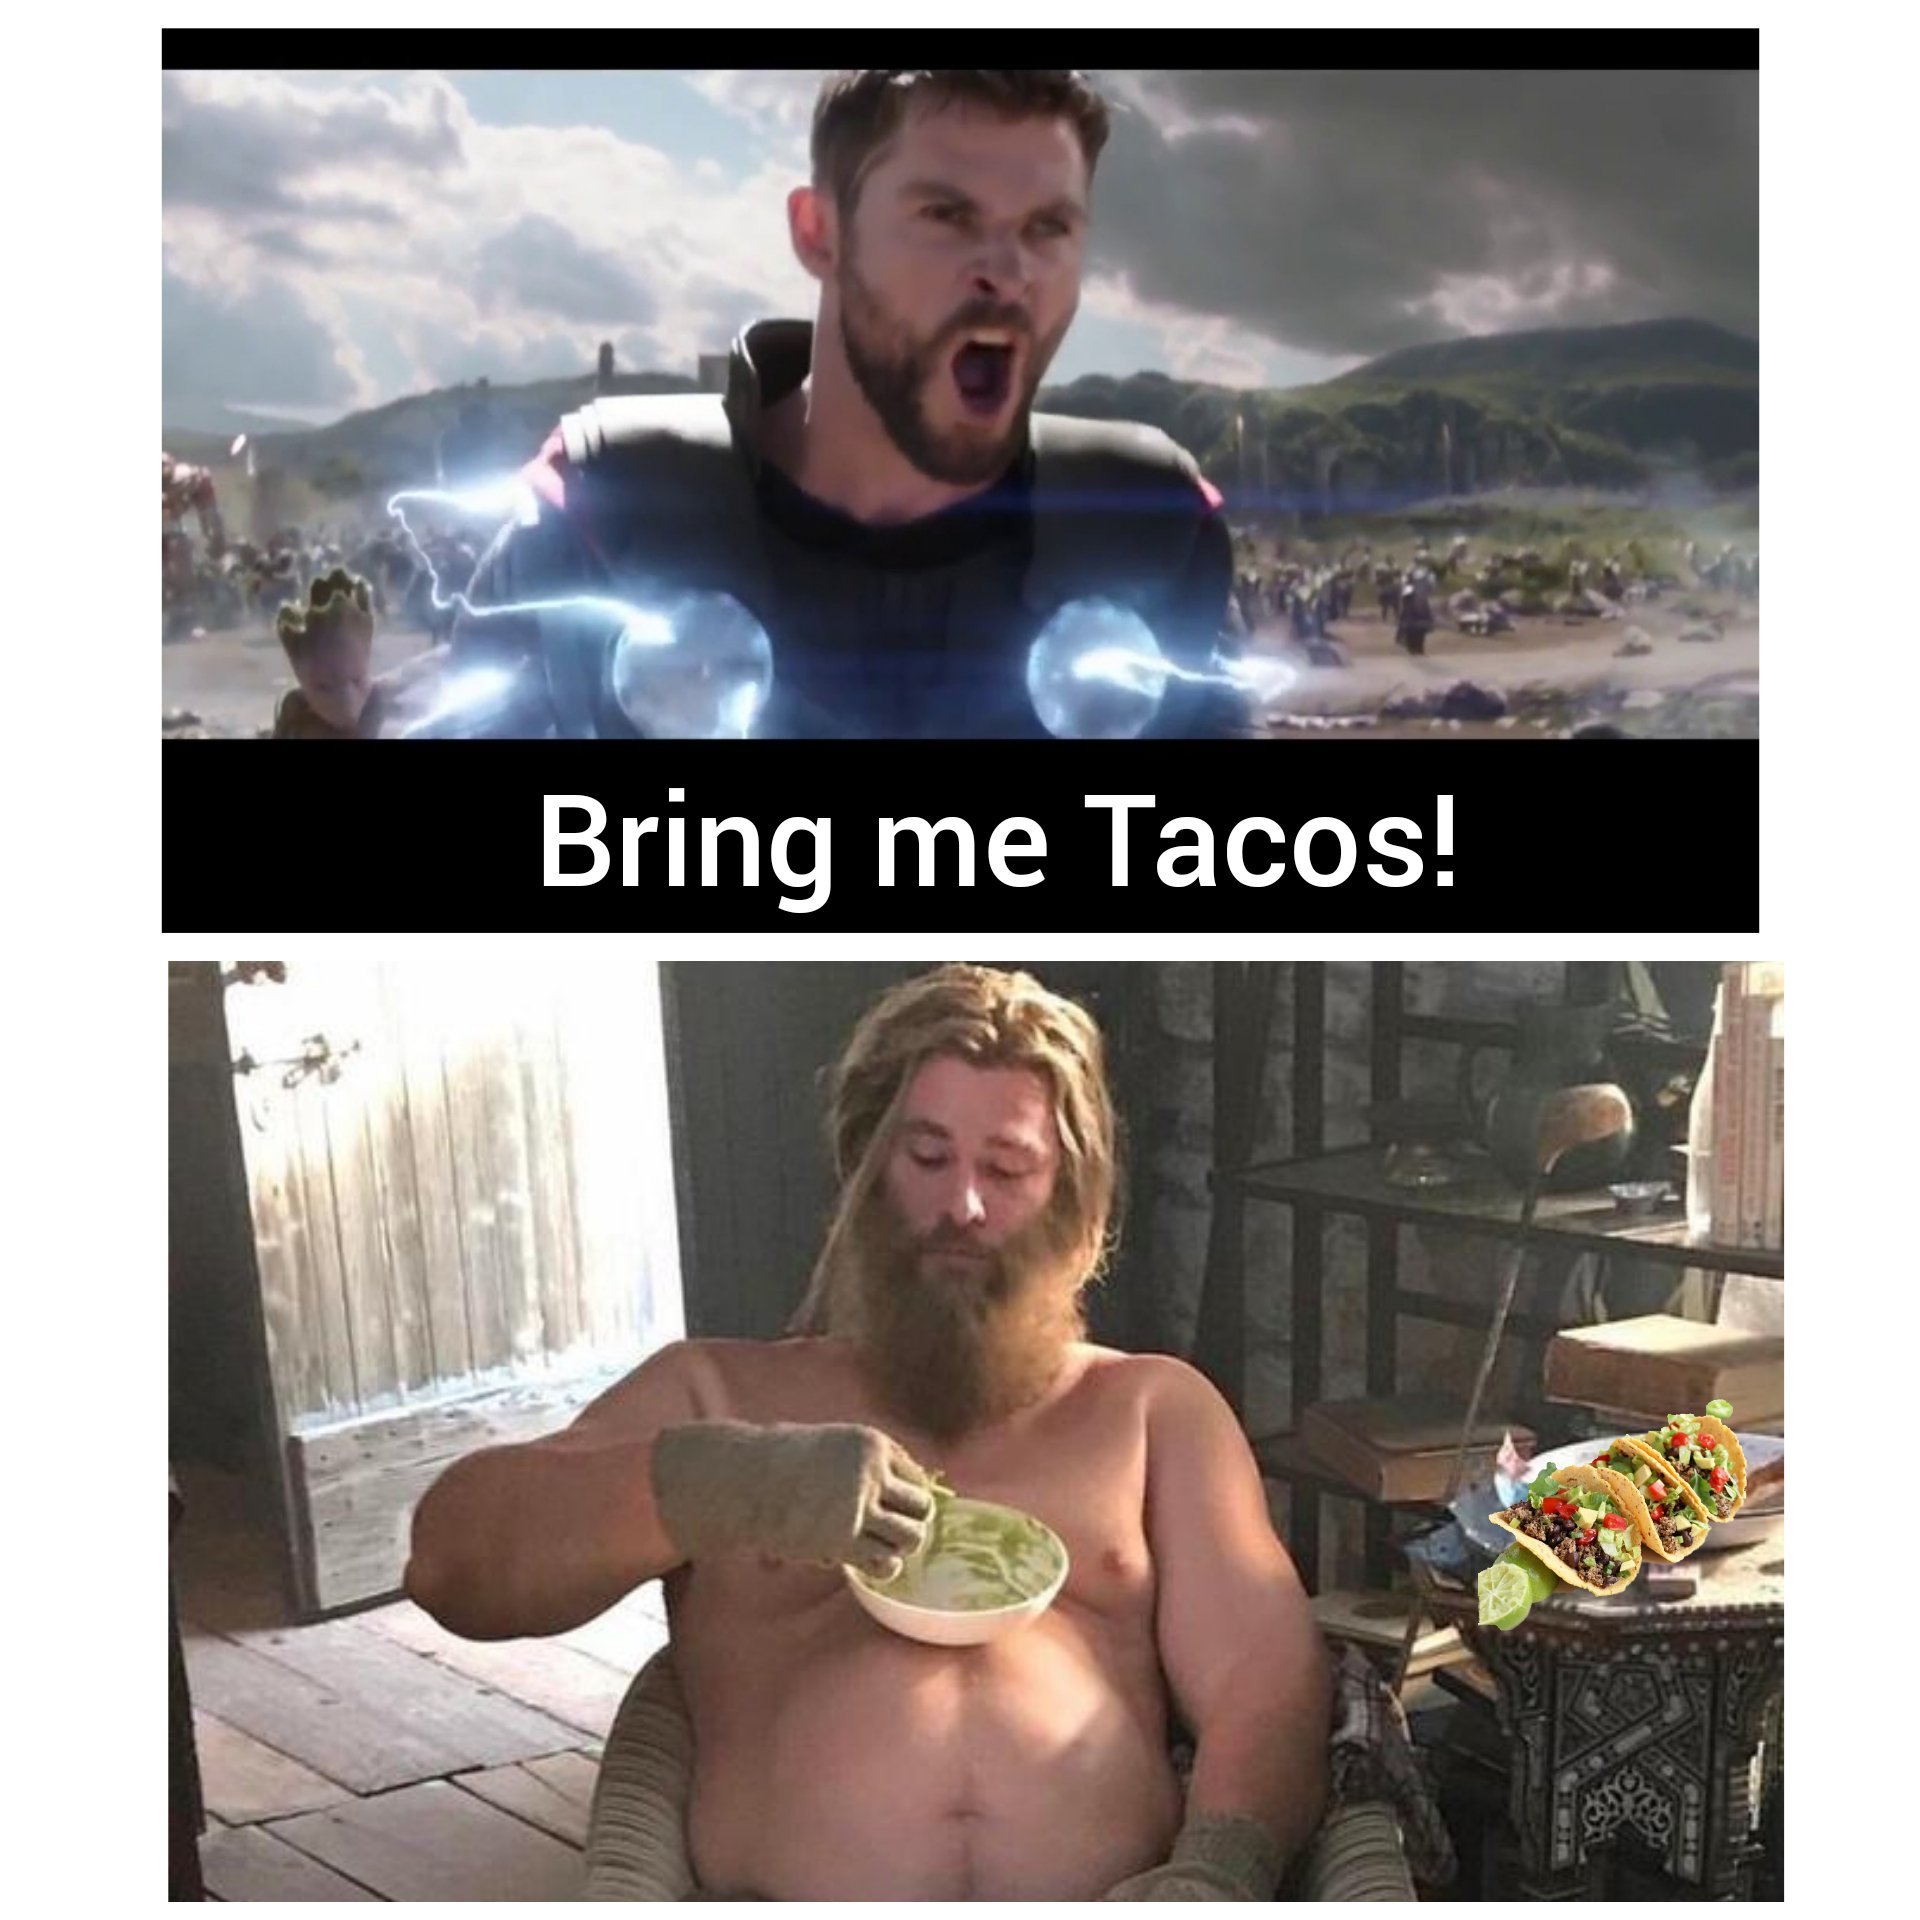 So it was Tacos instead of Thanos - meme